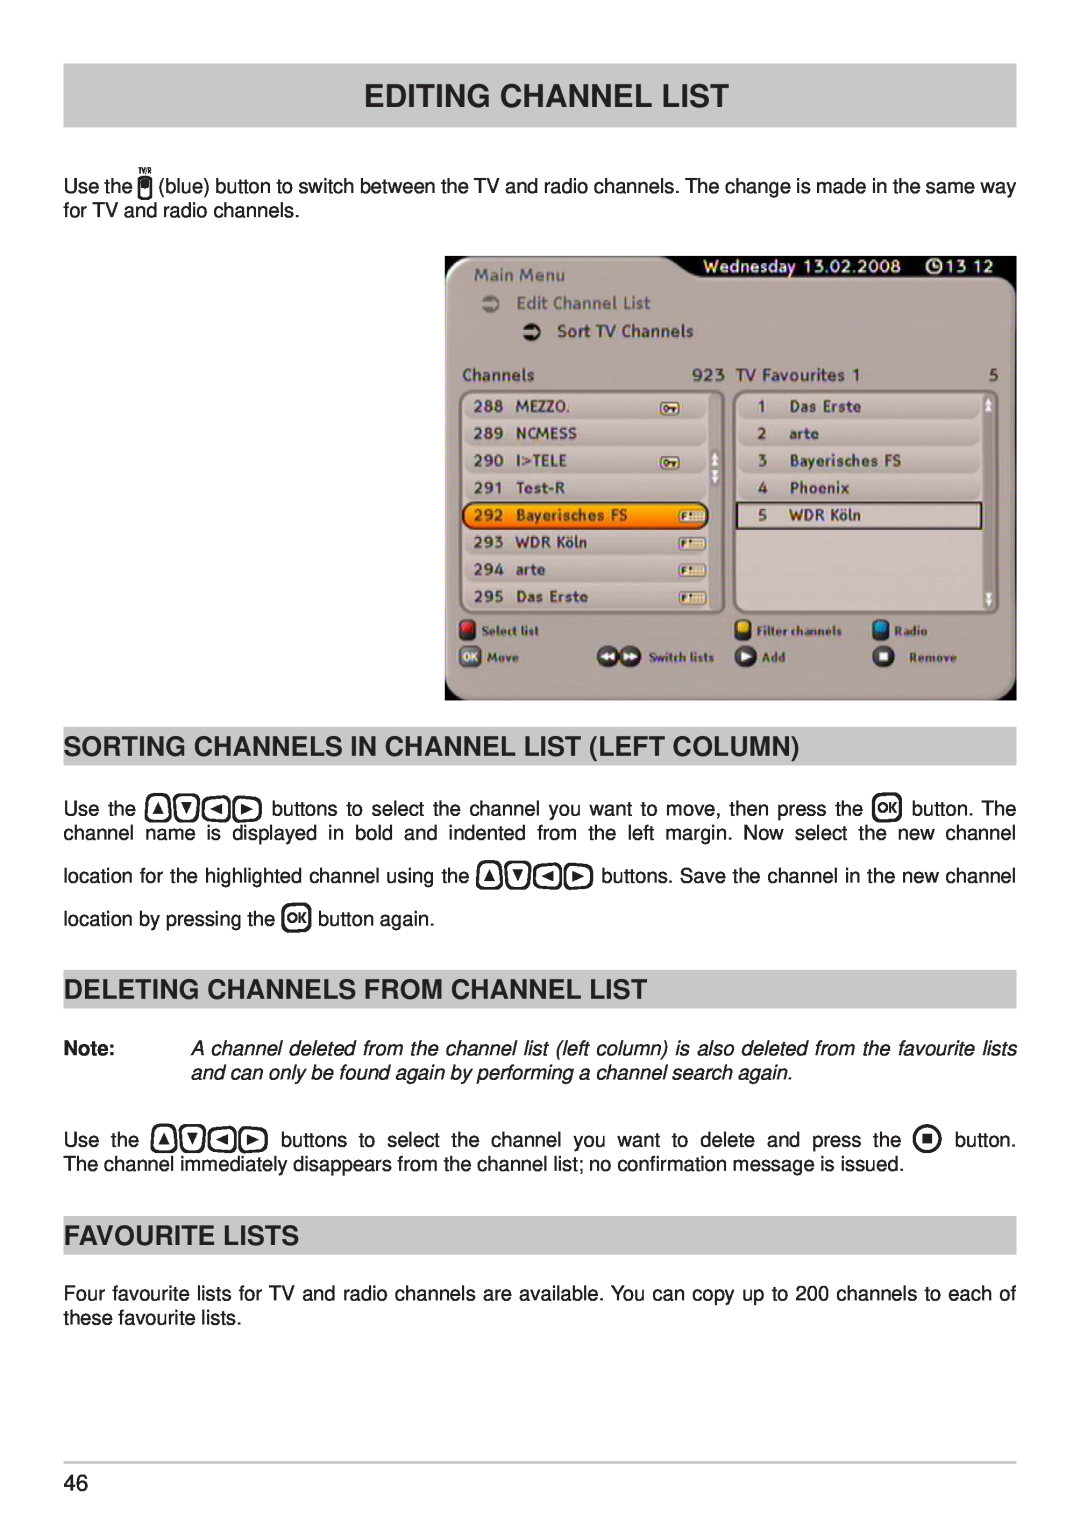 Kathrein UFS 790sw Editing Channel List, Sorting Channels In Channel List Left Column, Deleting Channels From Channel List 